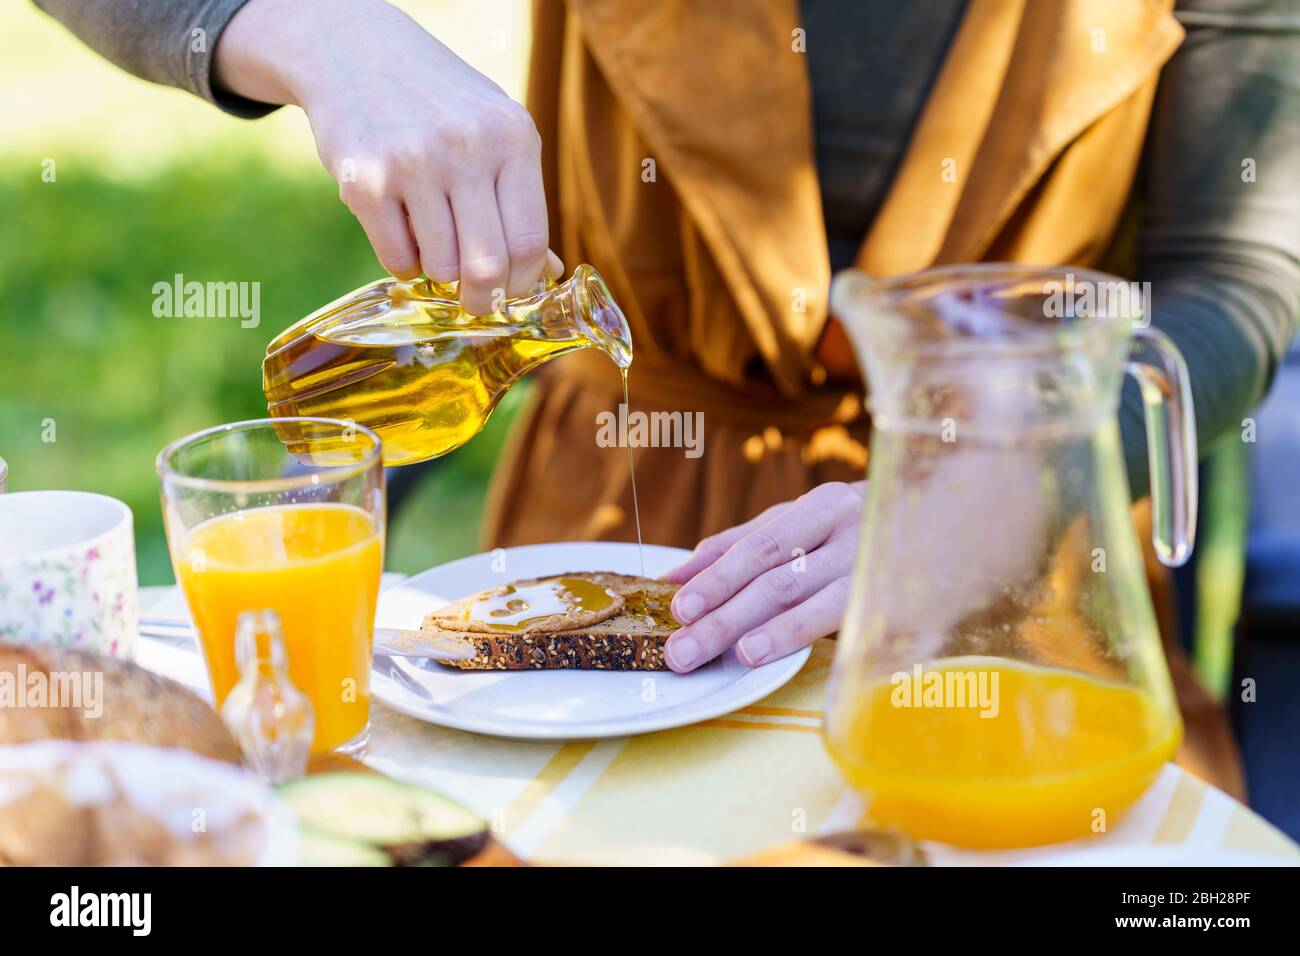 Close-up og woman pouring olive oil on bread Stock Photo